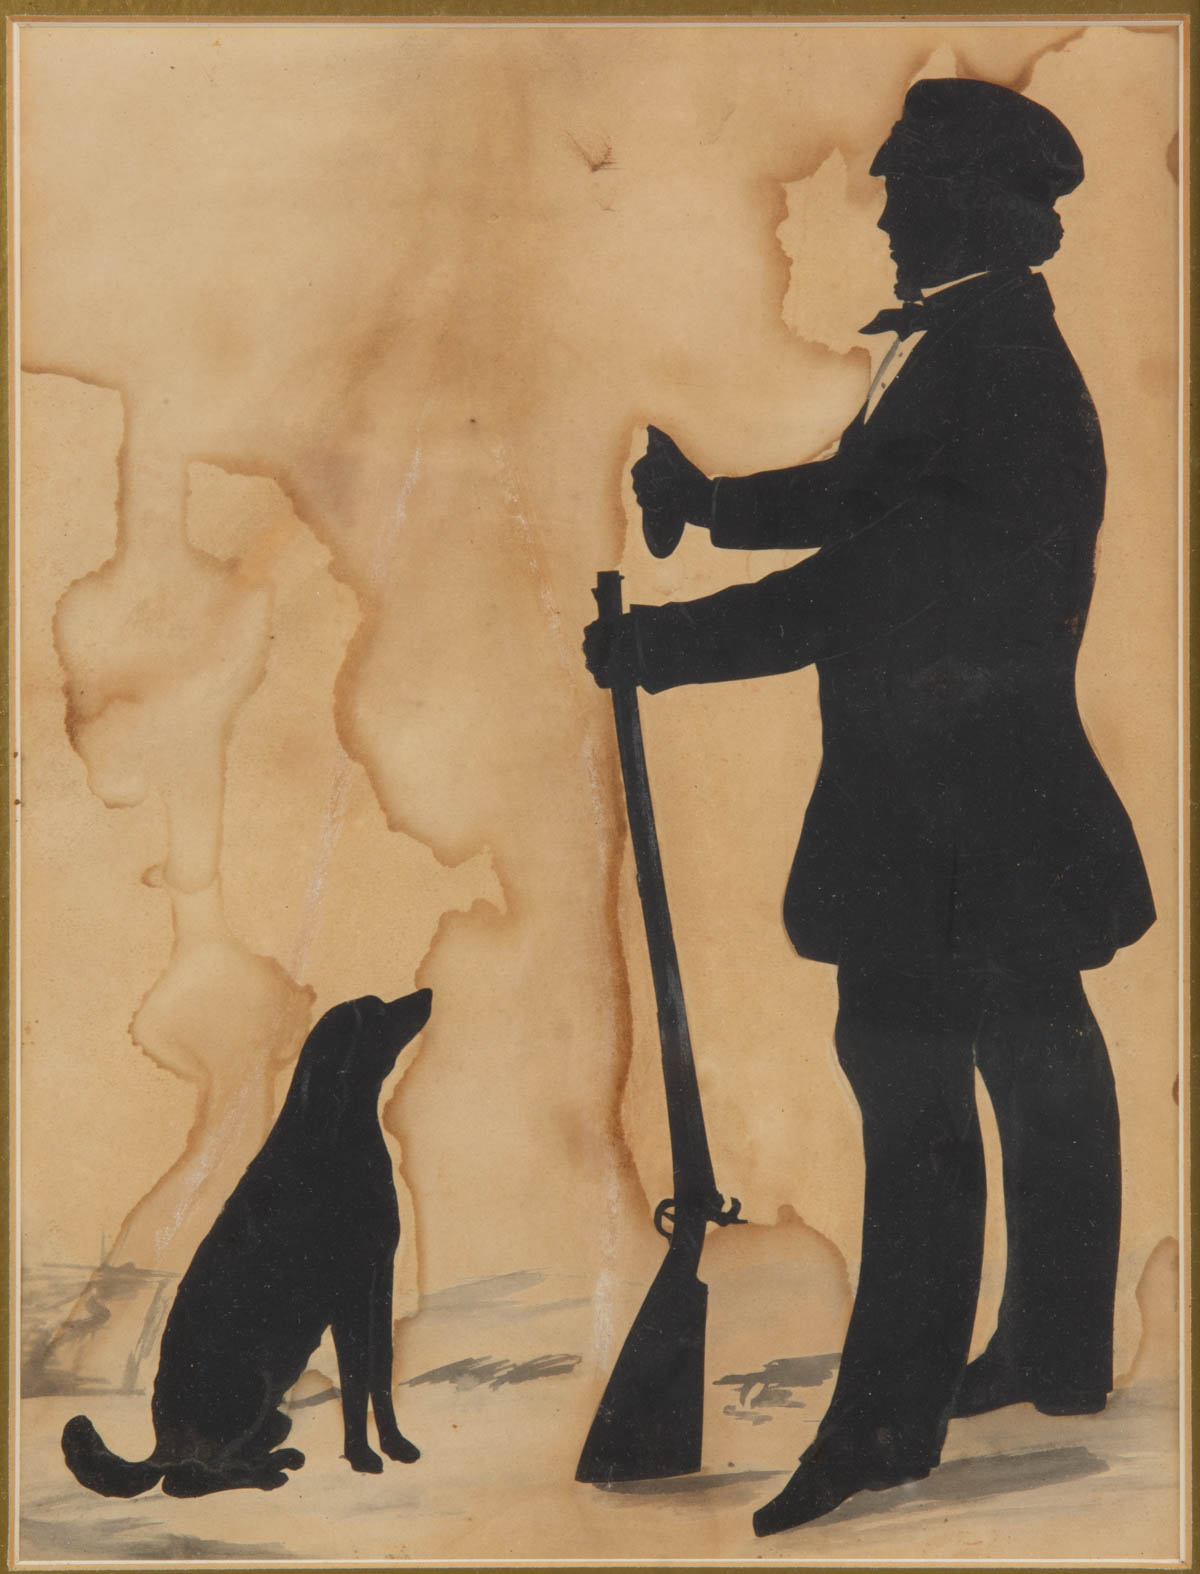 AMERICAN OR BRITISH SCHOOL (19TH CENTURY) FOLK ART CUT-AND-PASTED SILHOUETTE OF HUNTER AND DOG